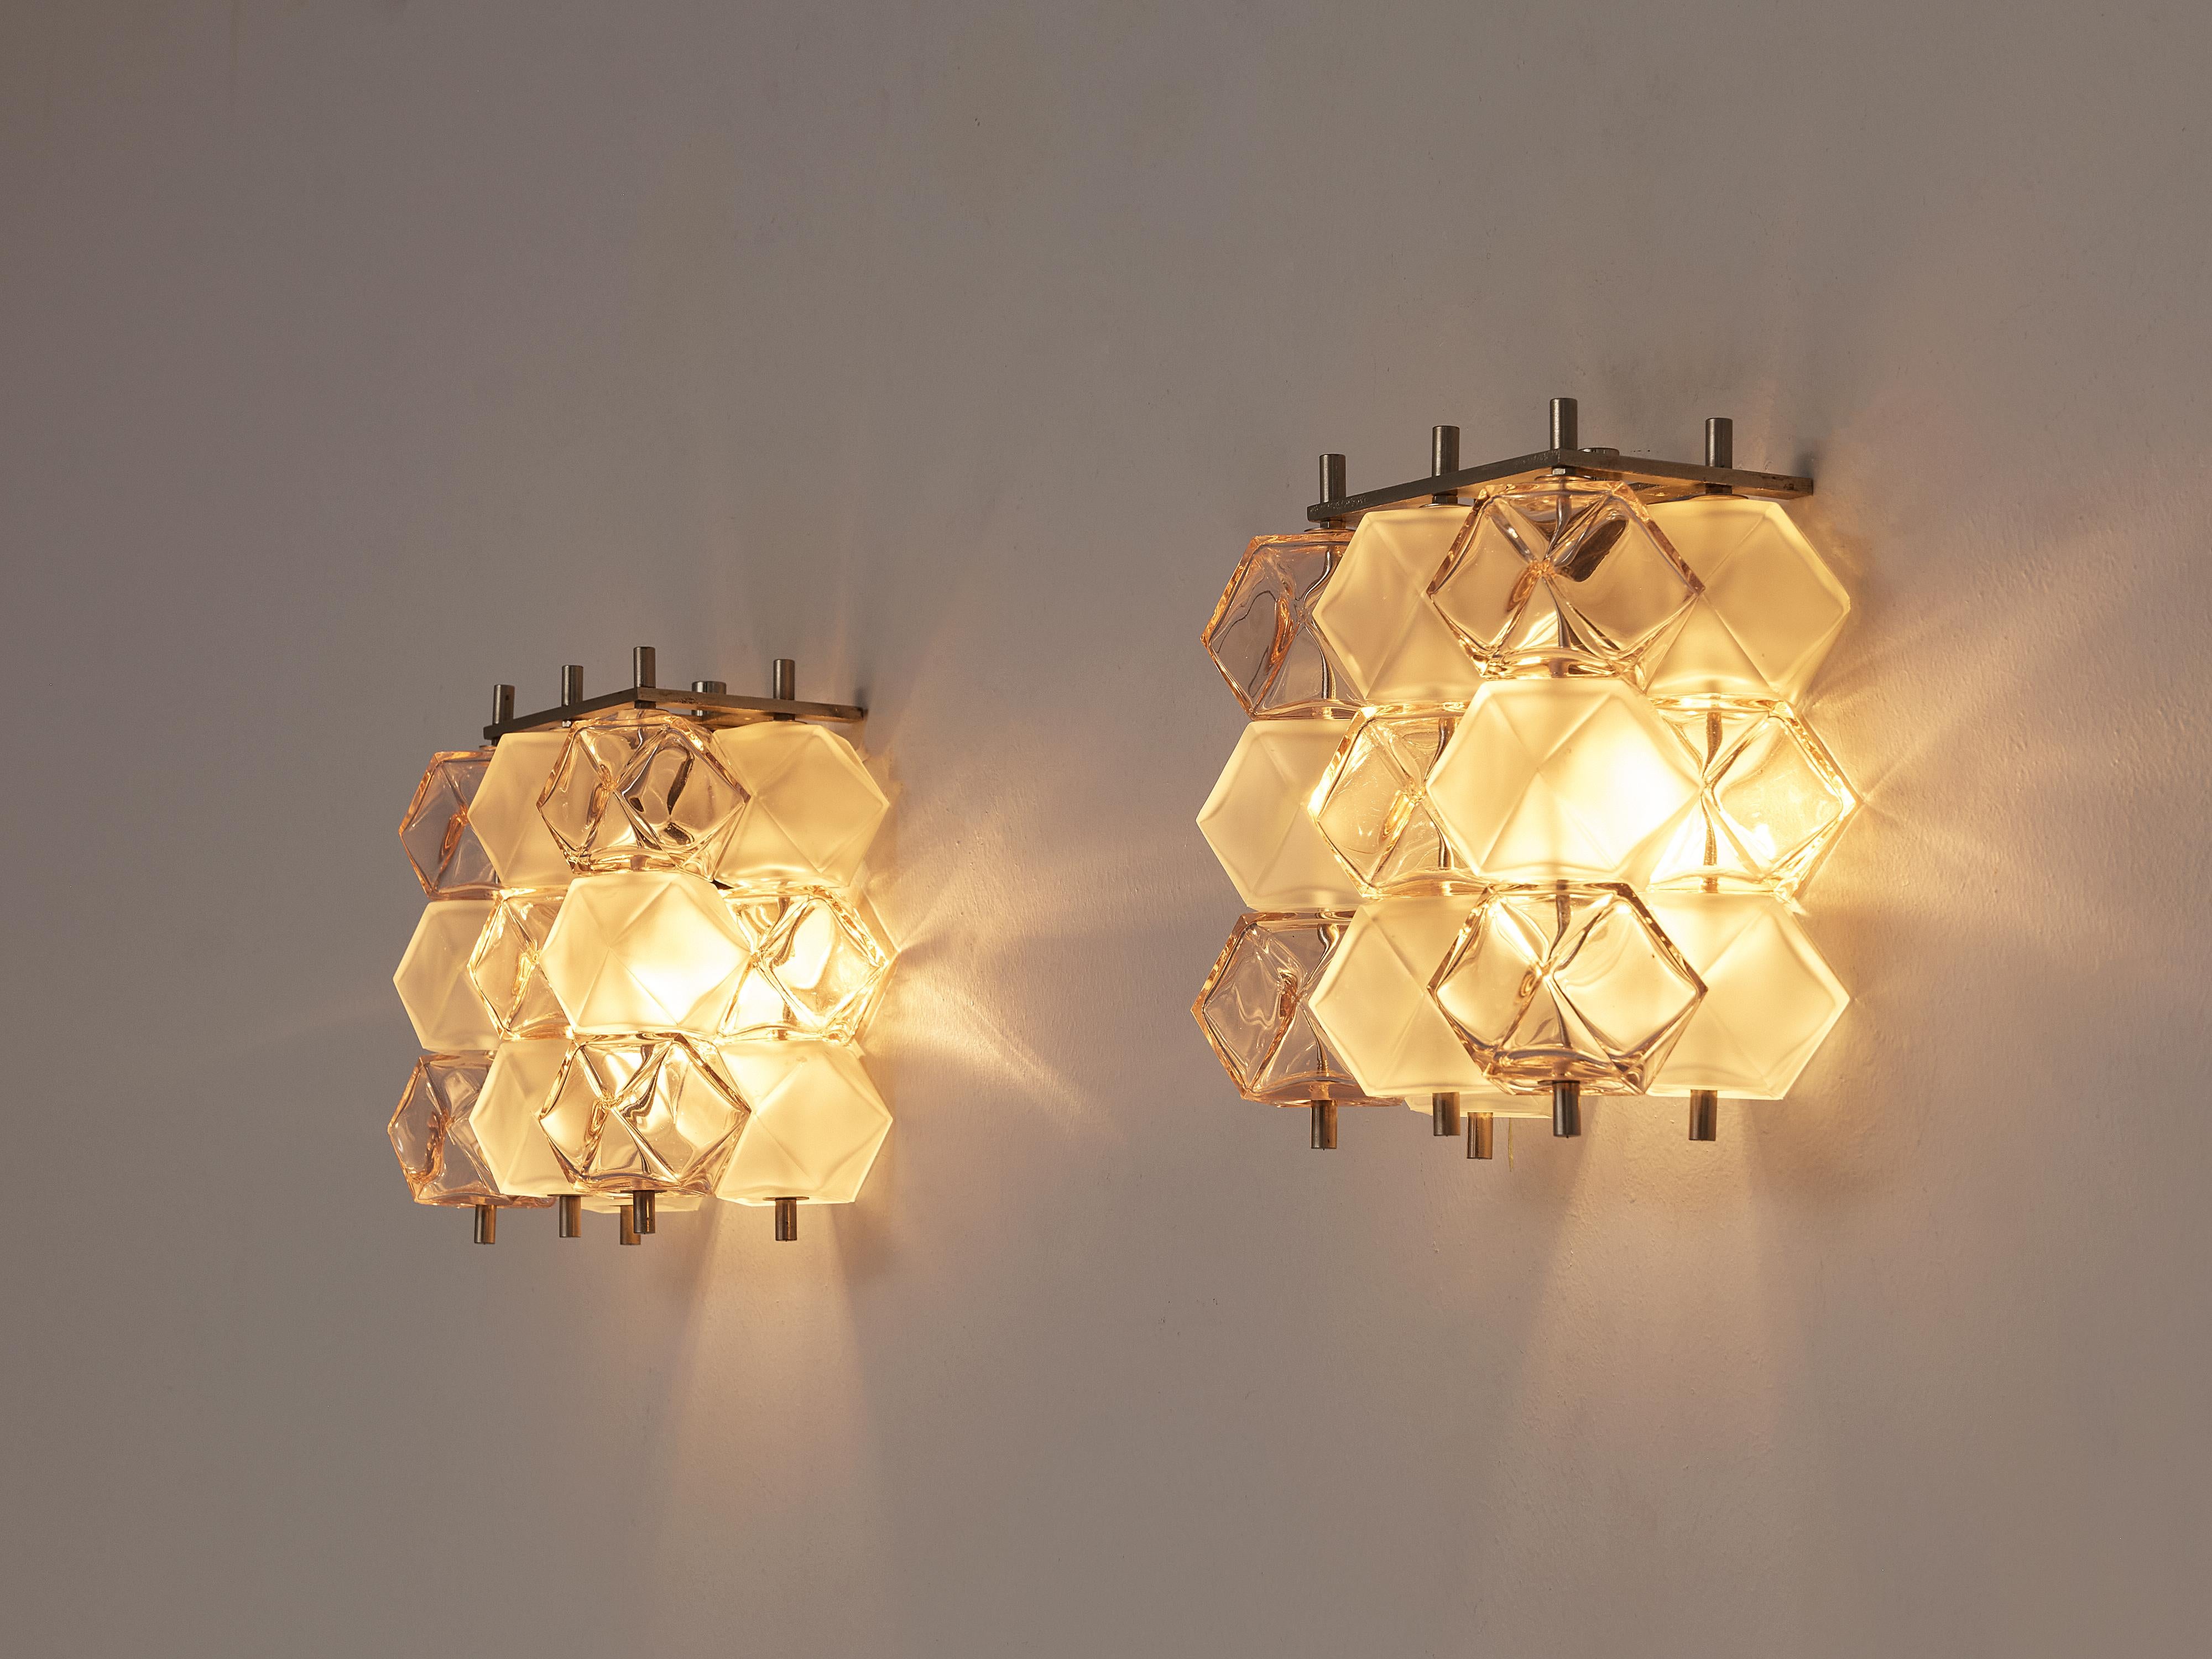 Pair of wall lamps, glass, metal, Europe, 1980s

These lovely wall lights consist of diamond-shaped glass cubes in white and soft pink color. They are adjusted to a metal construction that shows both on top and bottom. Due to the polygonal shape,